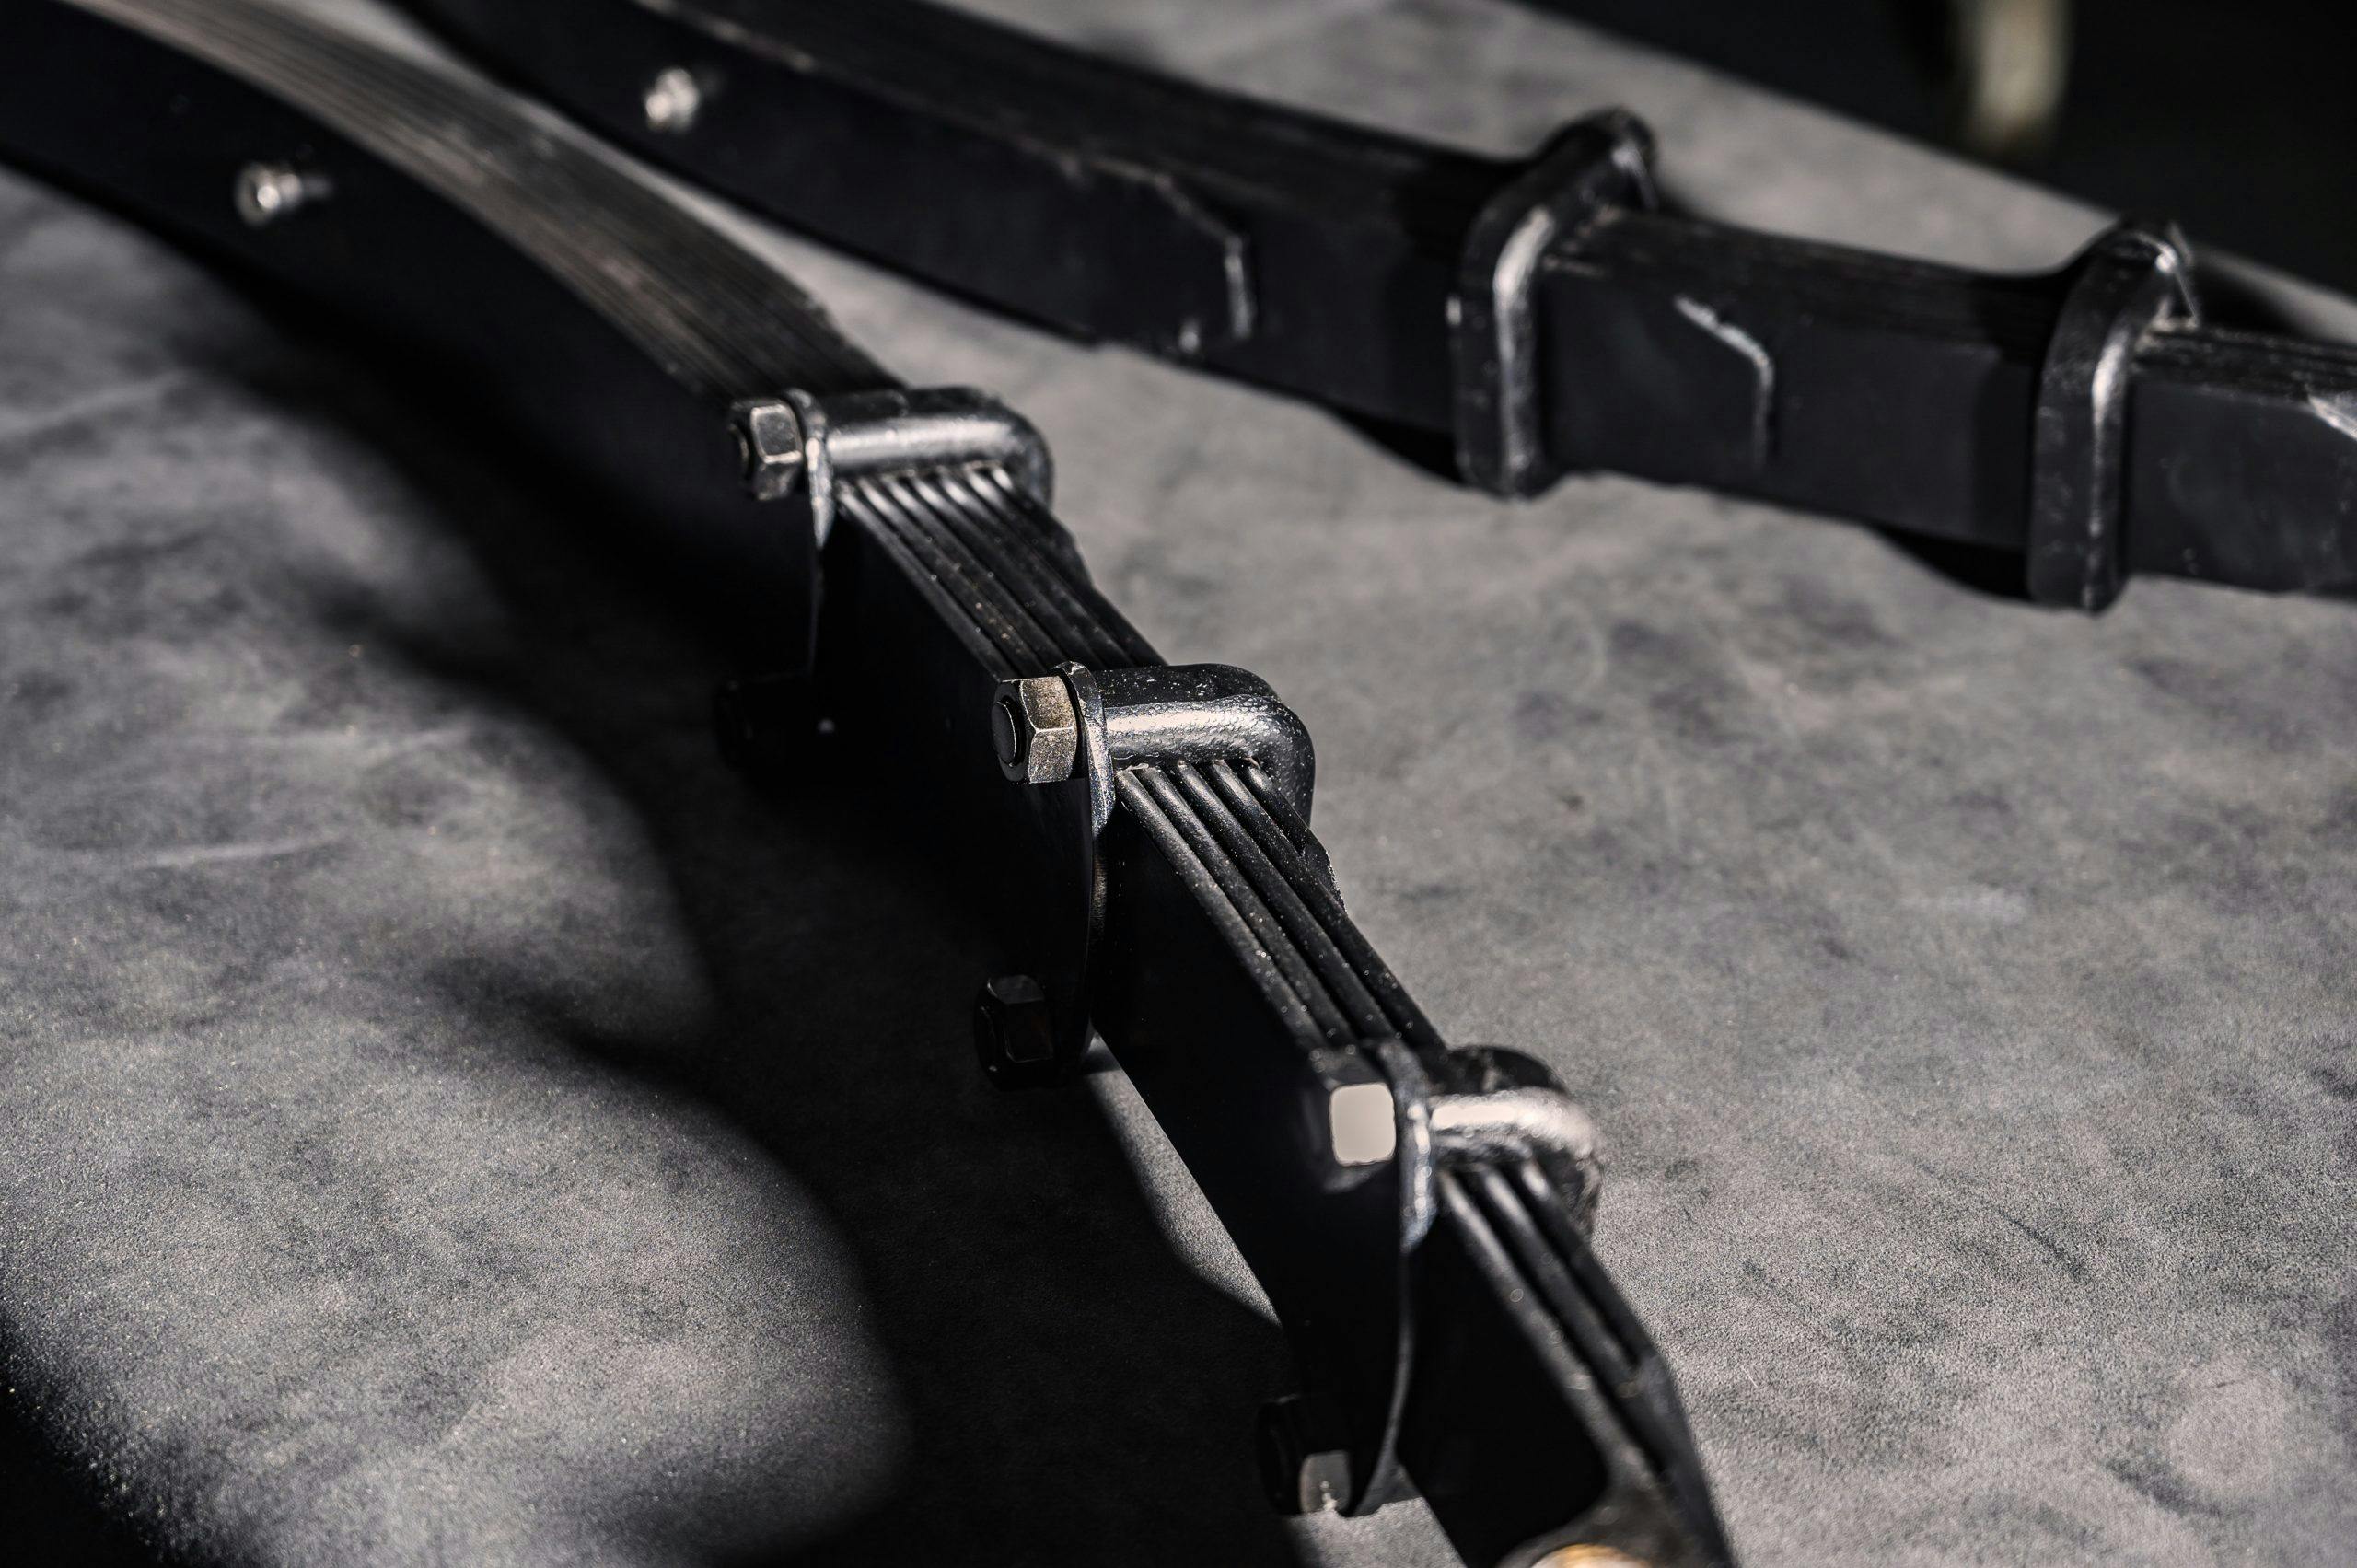 bentley blower continuation series leaf spring packs close up